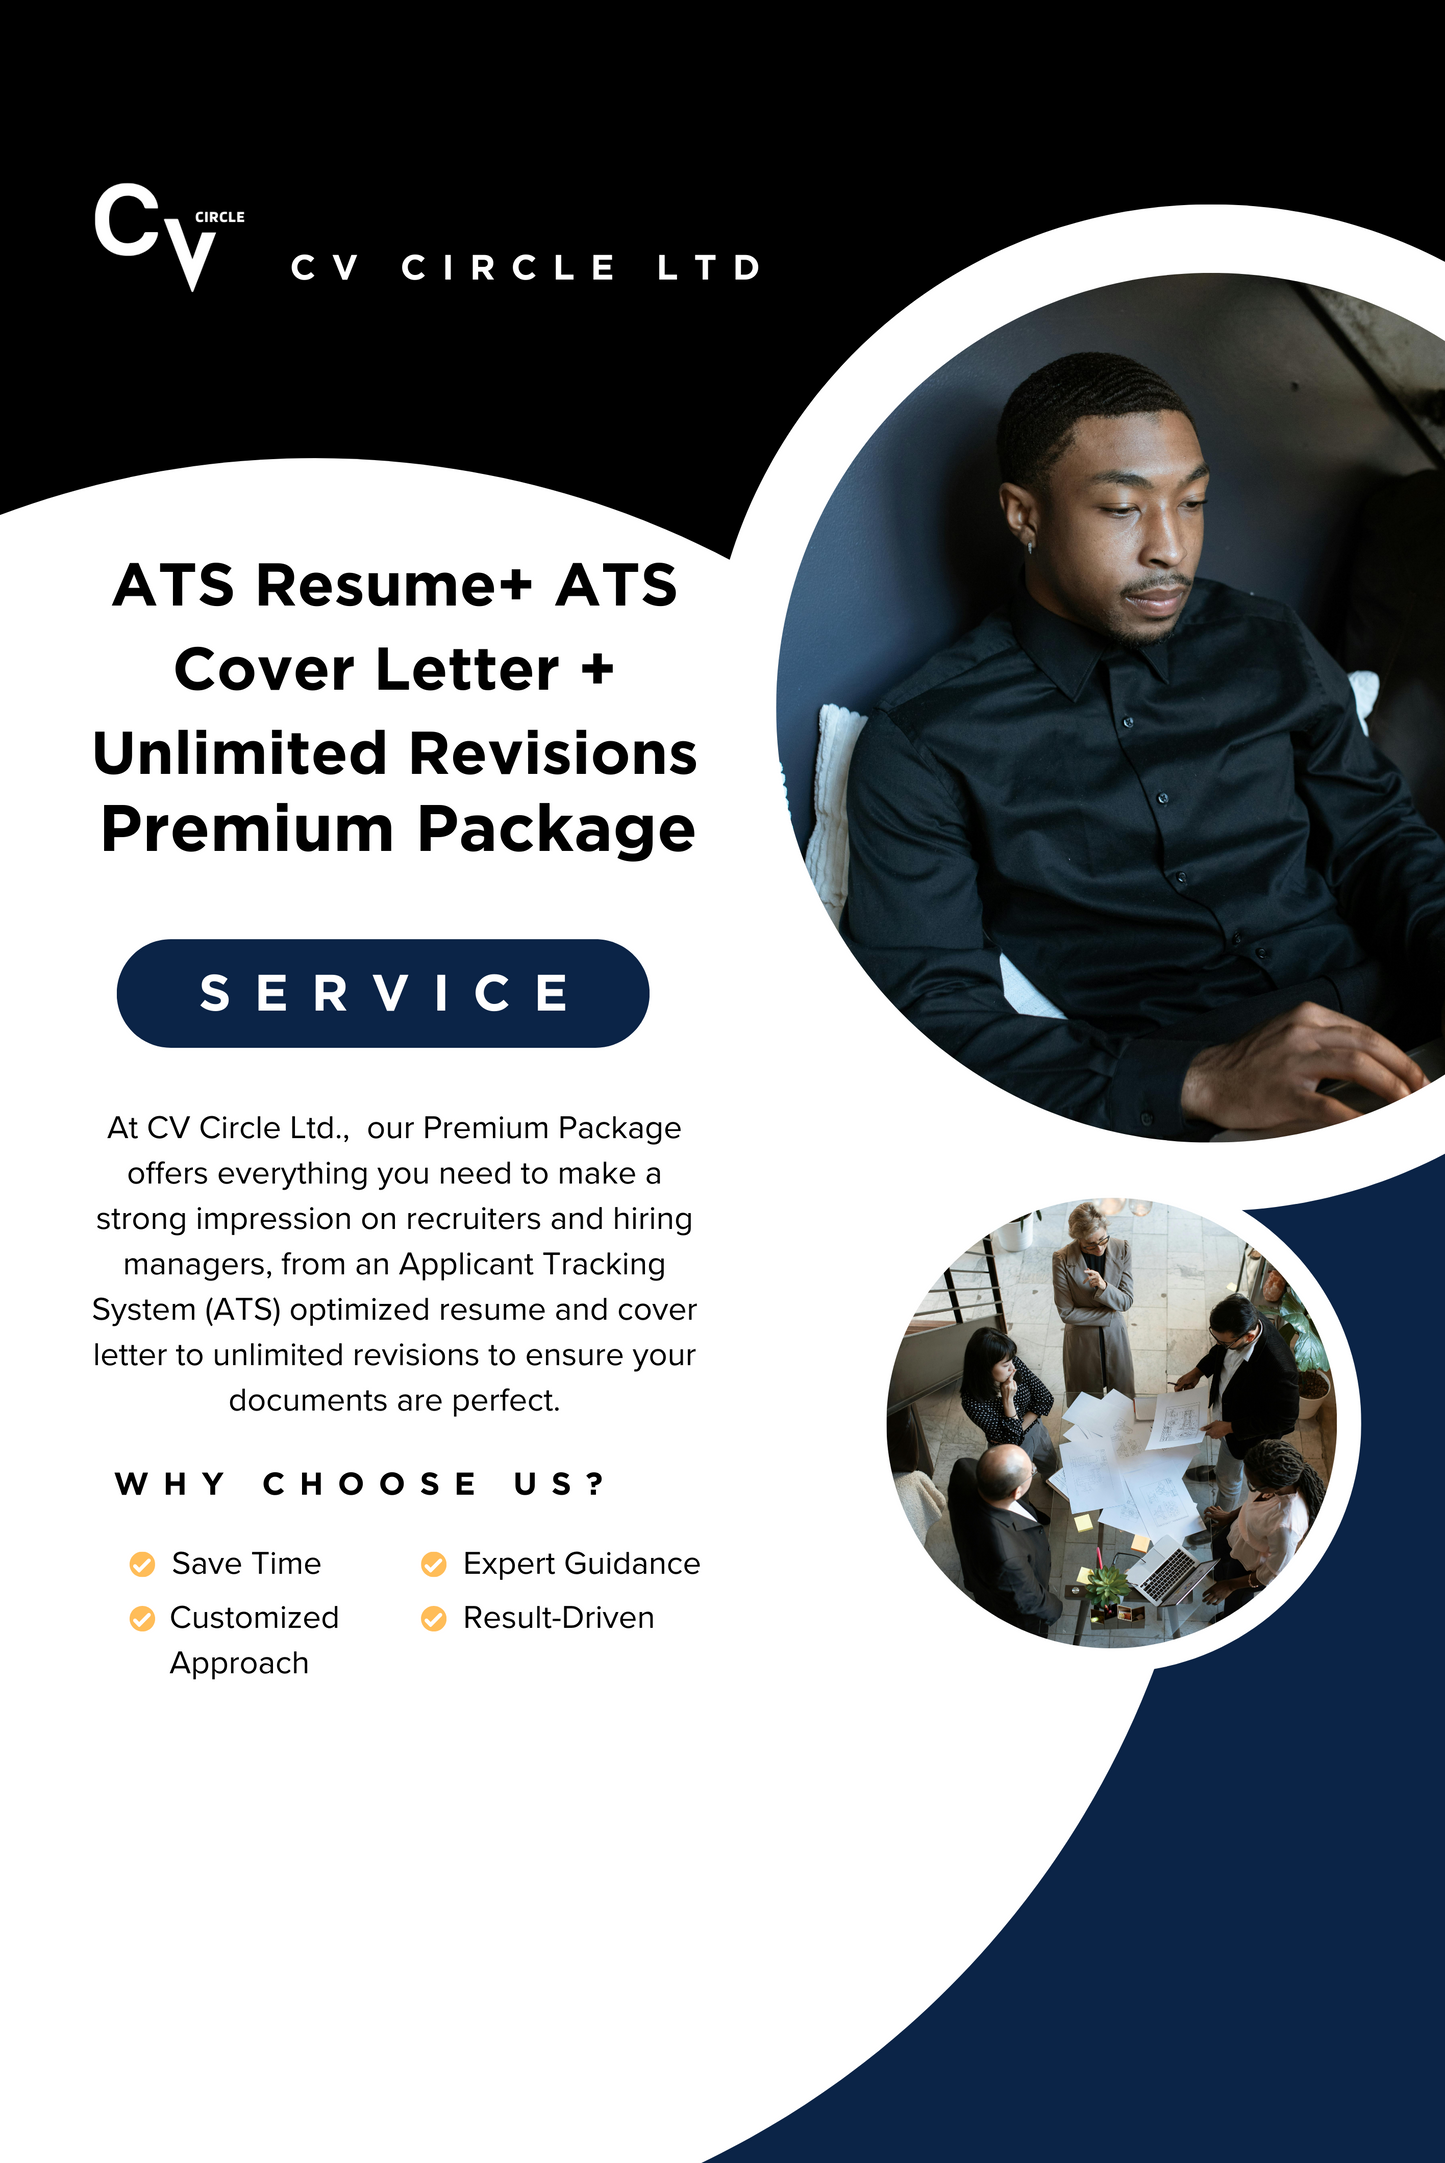 Premium Package - ATS Resume - ATS Cover Letter + Unlimited Revisions